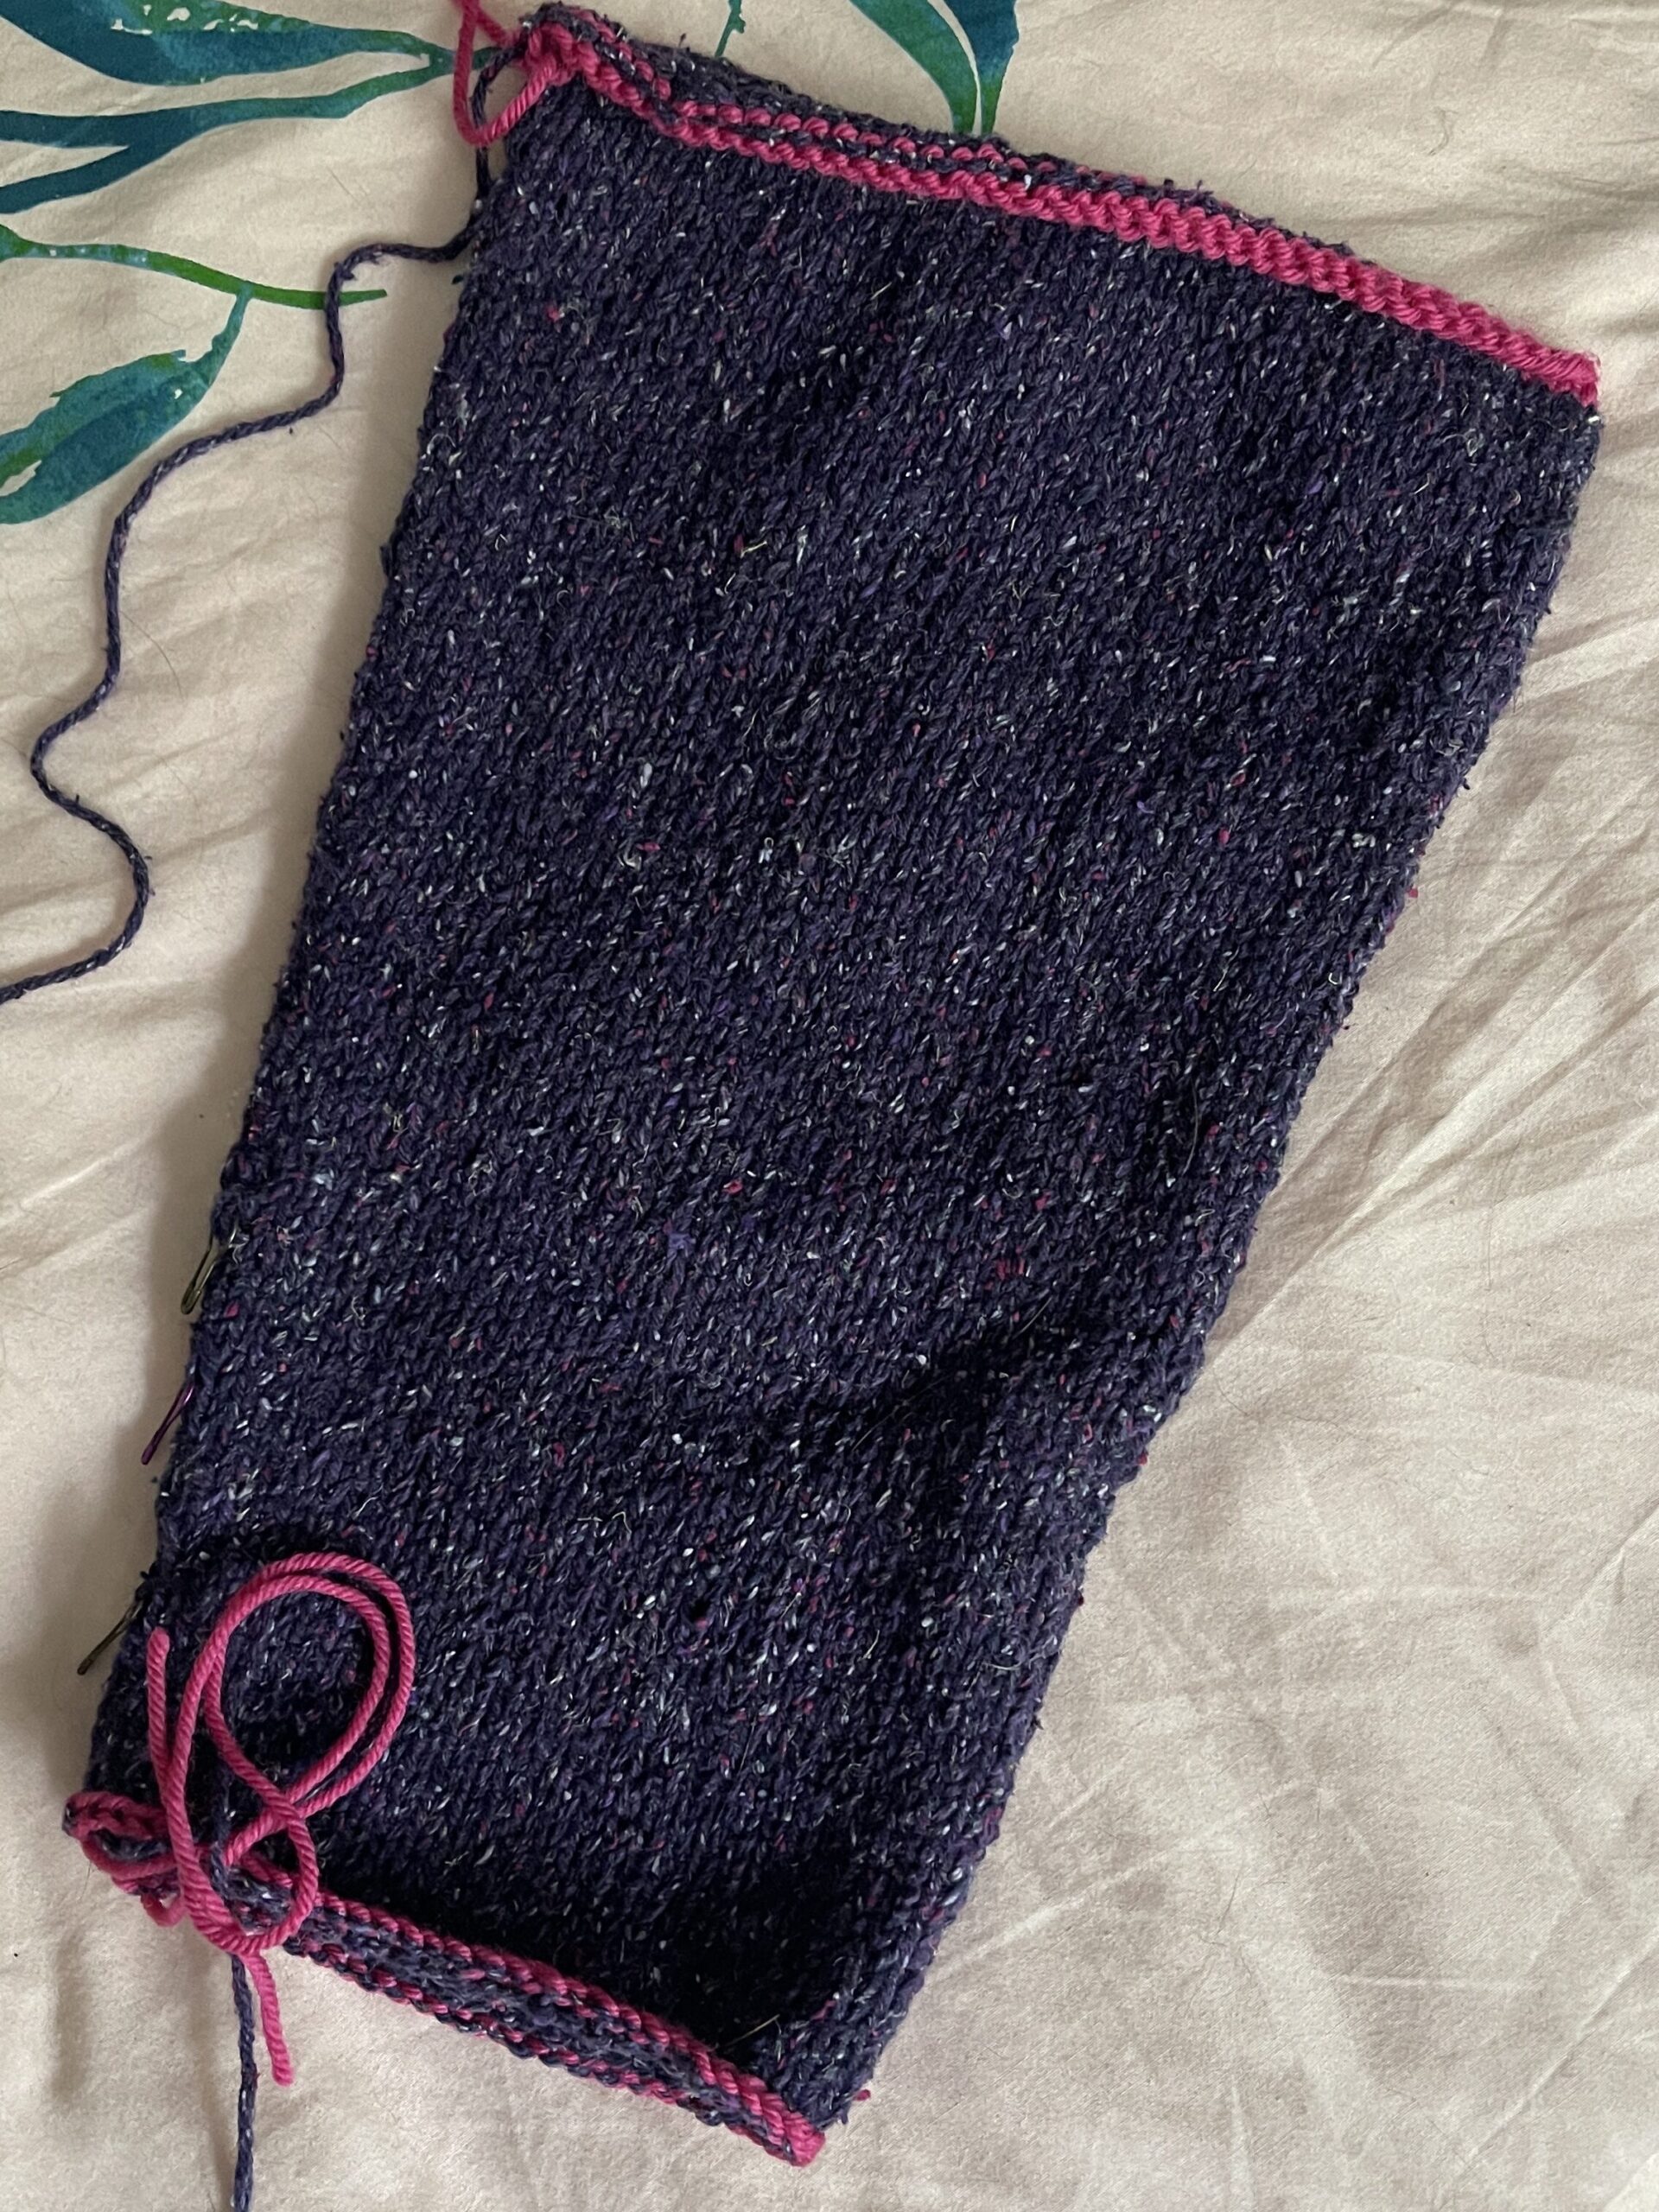 I knit a swatch sleeve for my Ginsan cardigan